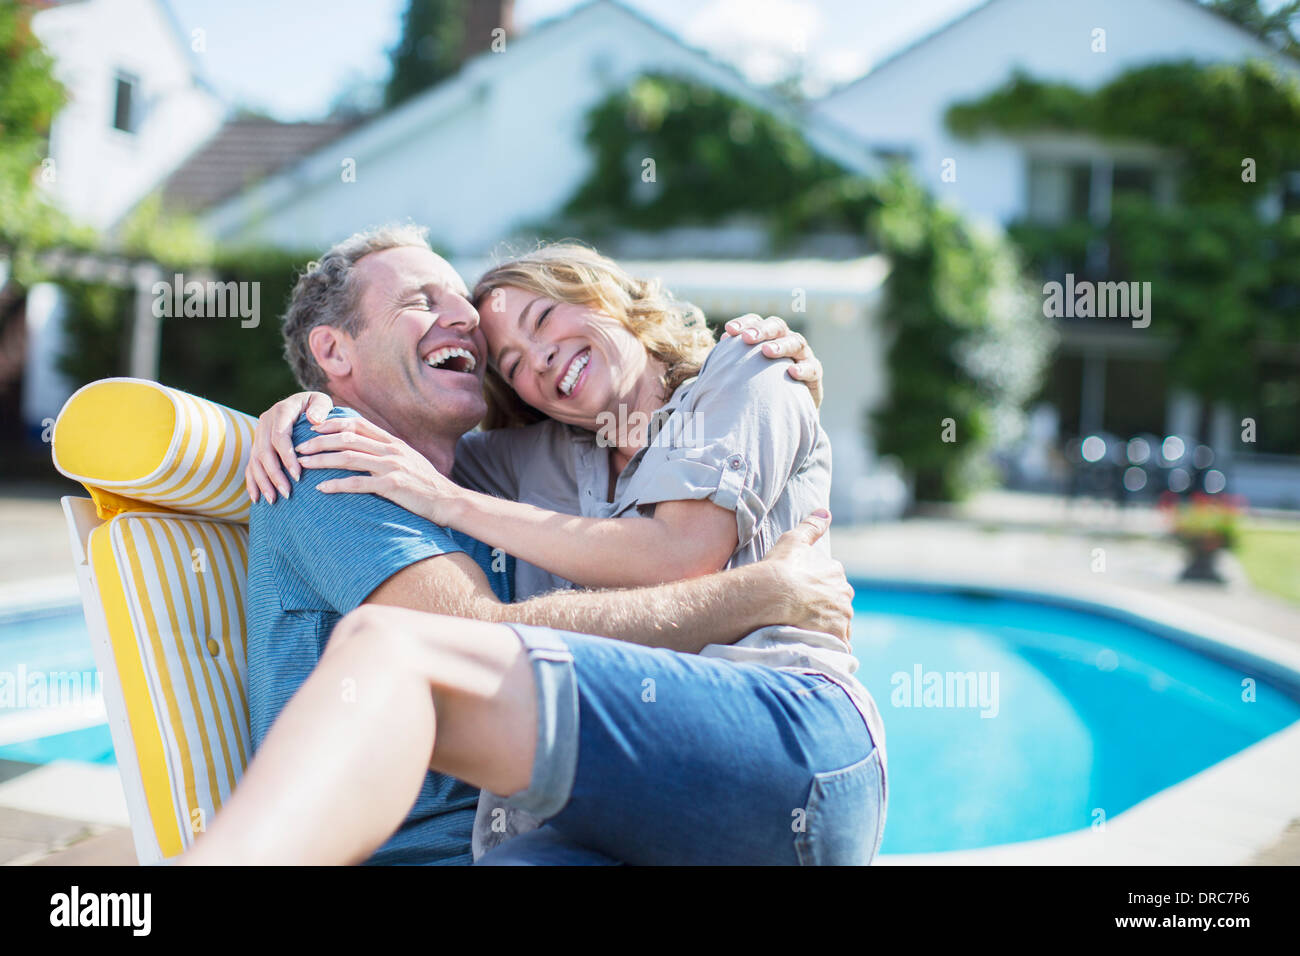 Couple relaxing in lounge chair at poolside Banque D'Images